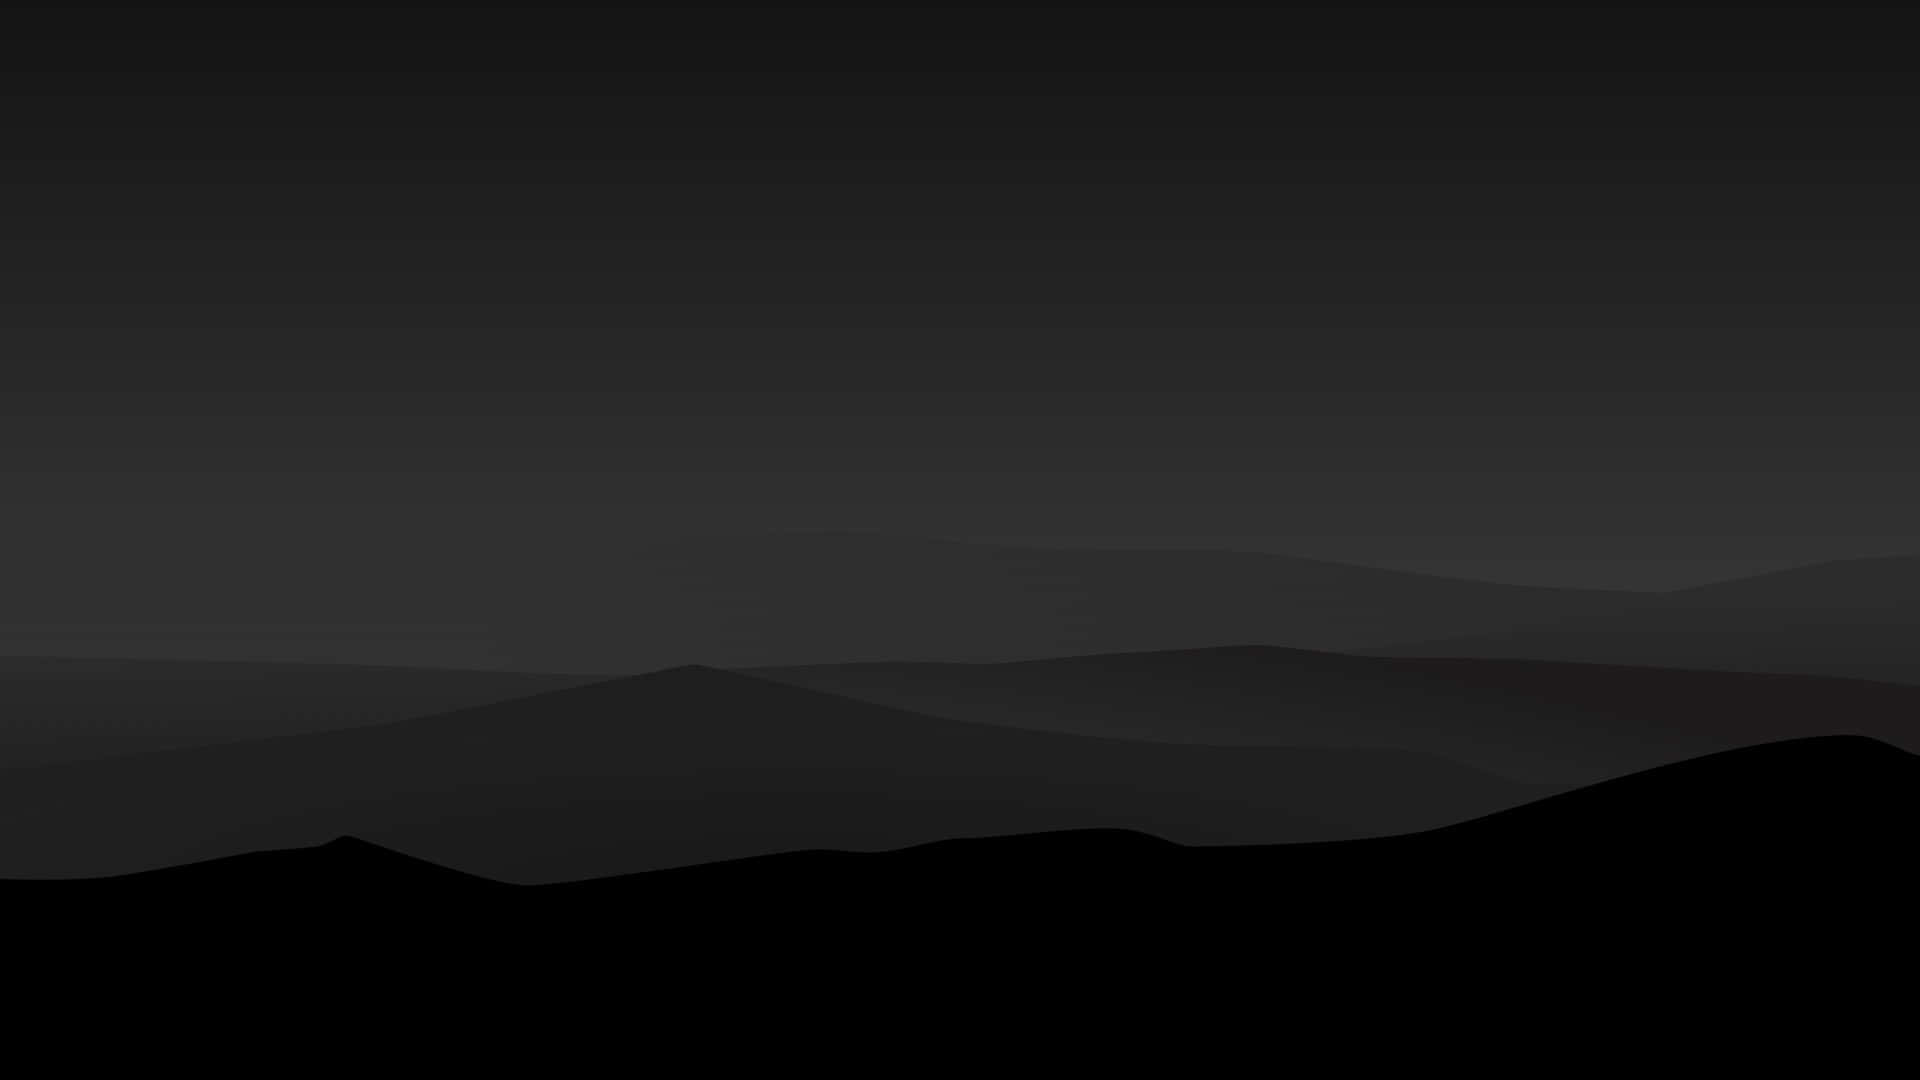 A Black Silhouette Of Mountains With A Dark Sky